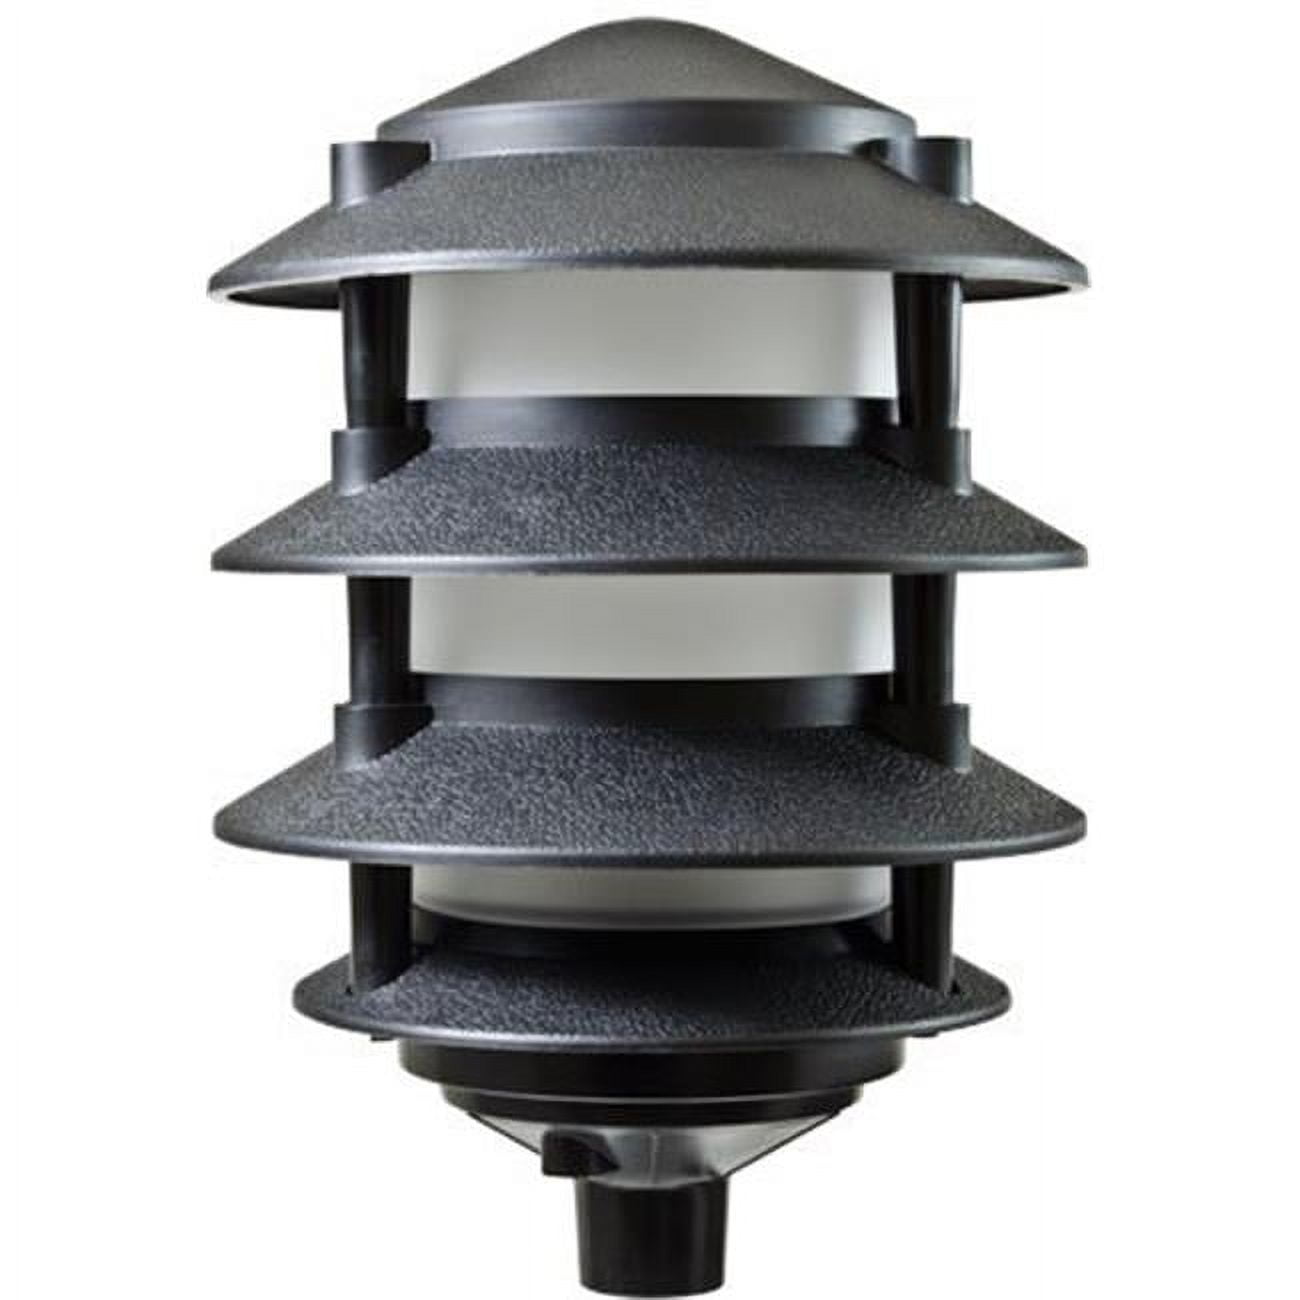 Picture of Dabmar Lighting FG5100-B 4 Tier 6 in. Top 0.5 in. Base Incandenscent 120 V Pagoda Fixture with Pre-Wired, Black, Bronze & Green